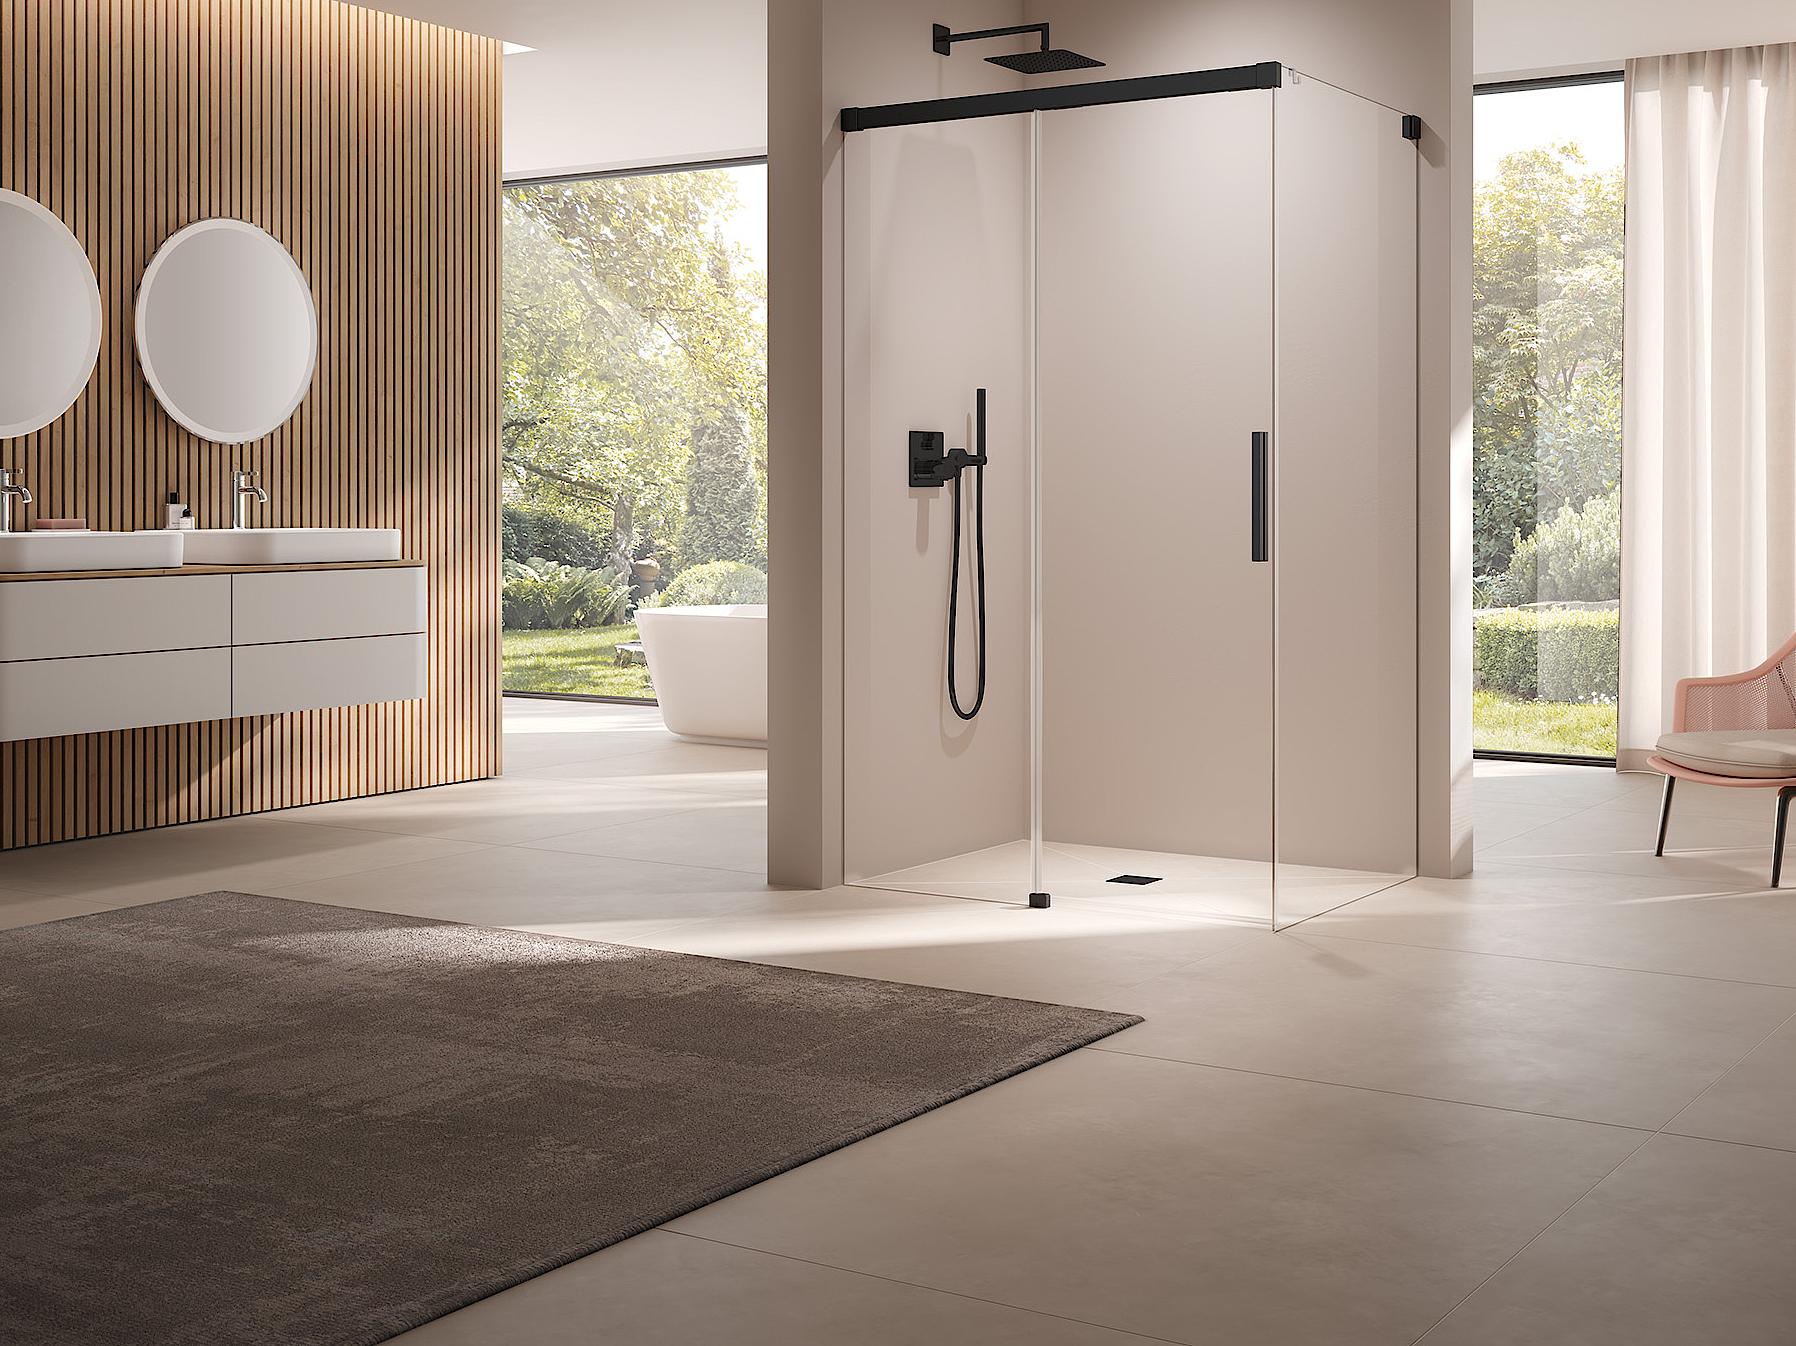 Kermi profile shower enclosure NICA off-floor two-part sliding door with fixed panel without wall profile